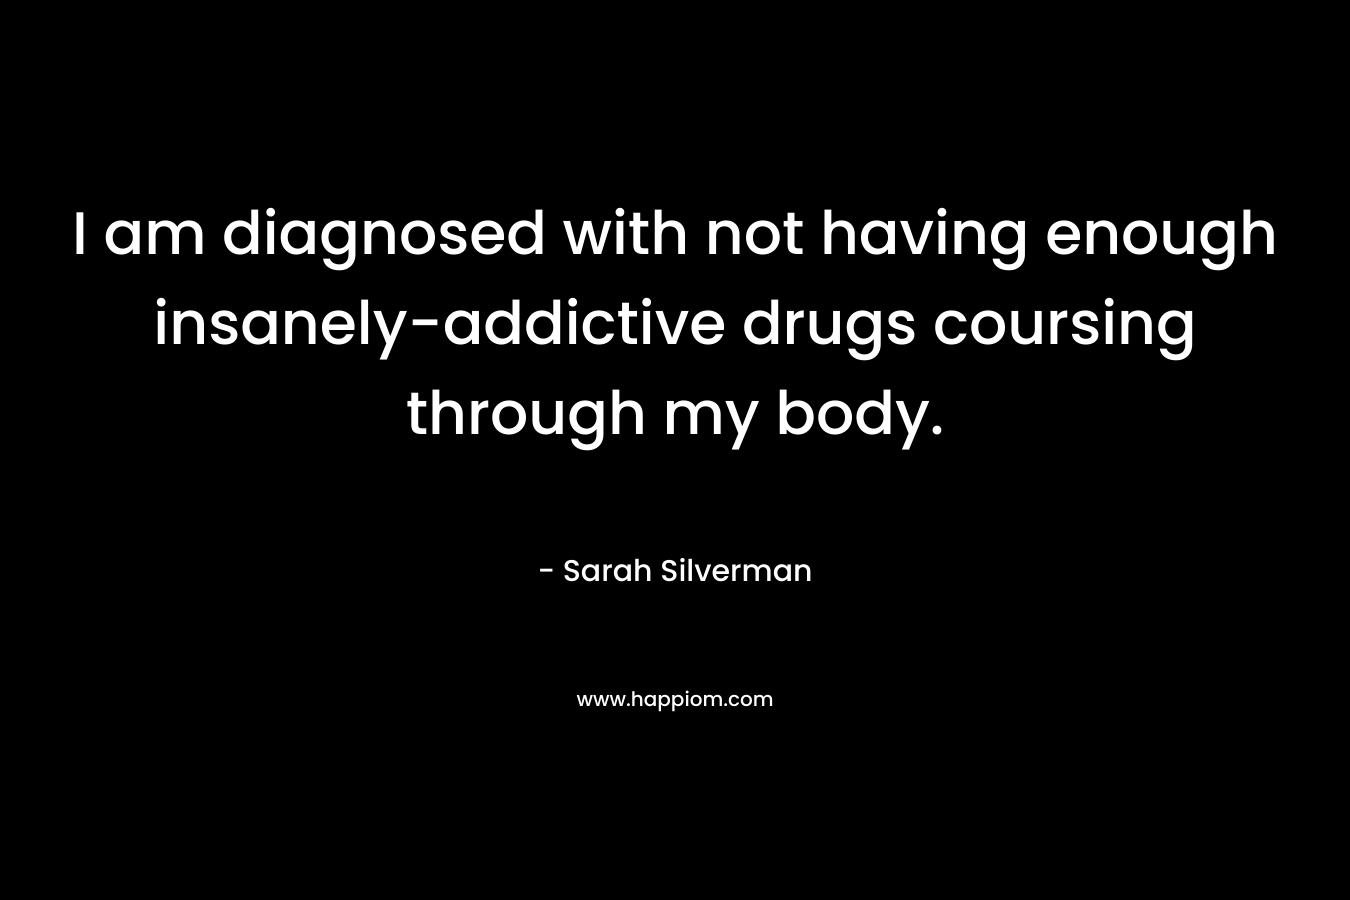 I am diagnosed with not having enough insanely-addictive drugs coursing through my body. – Sarah Silverman